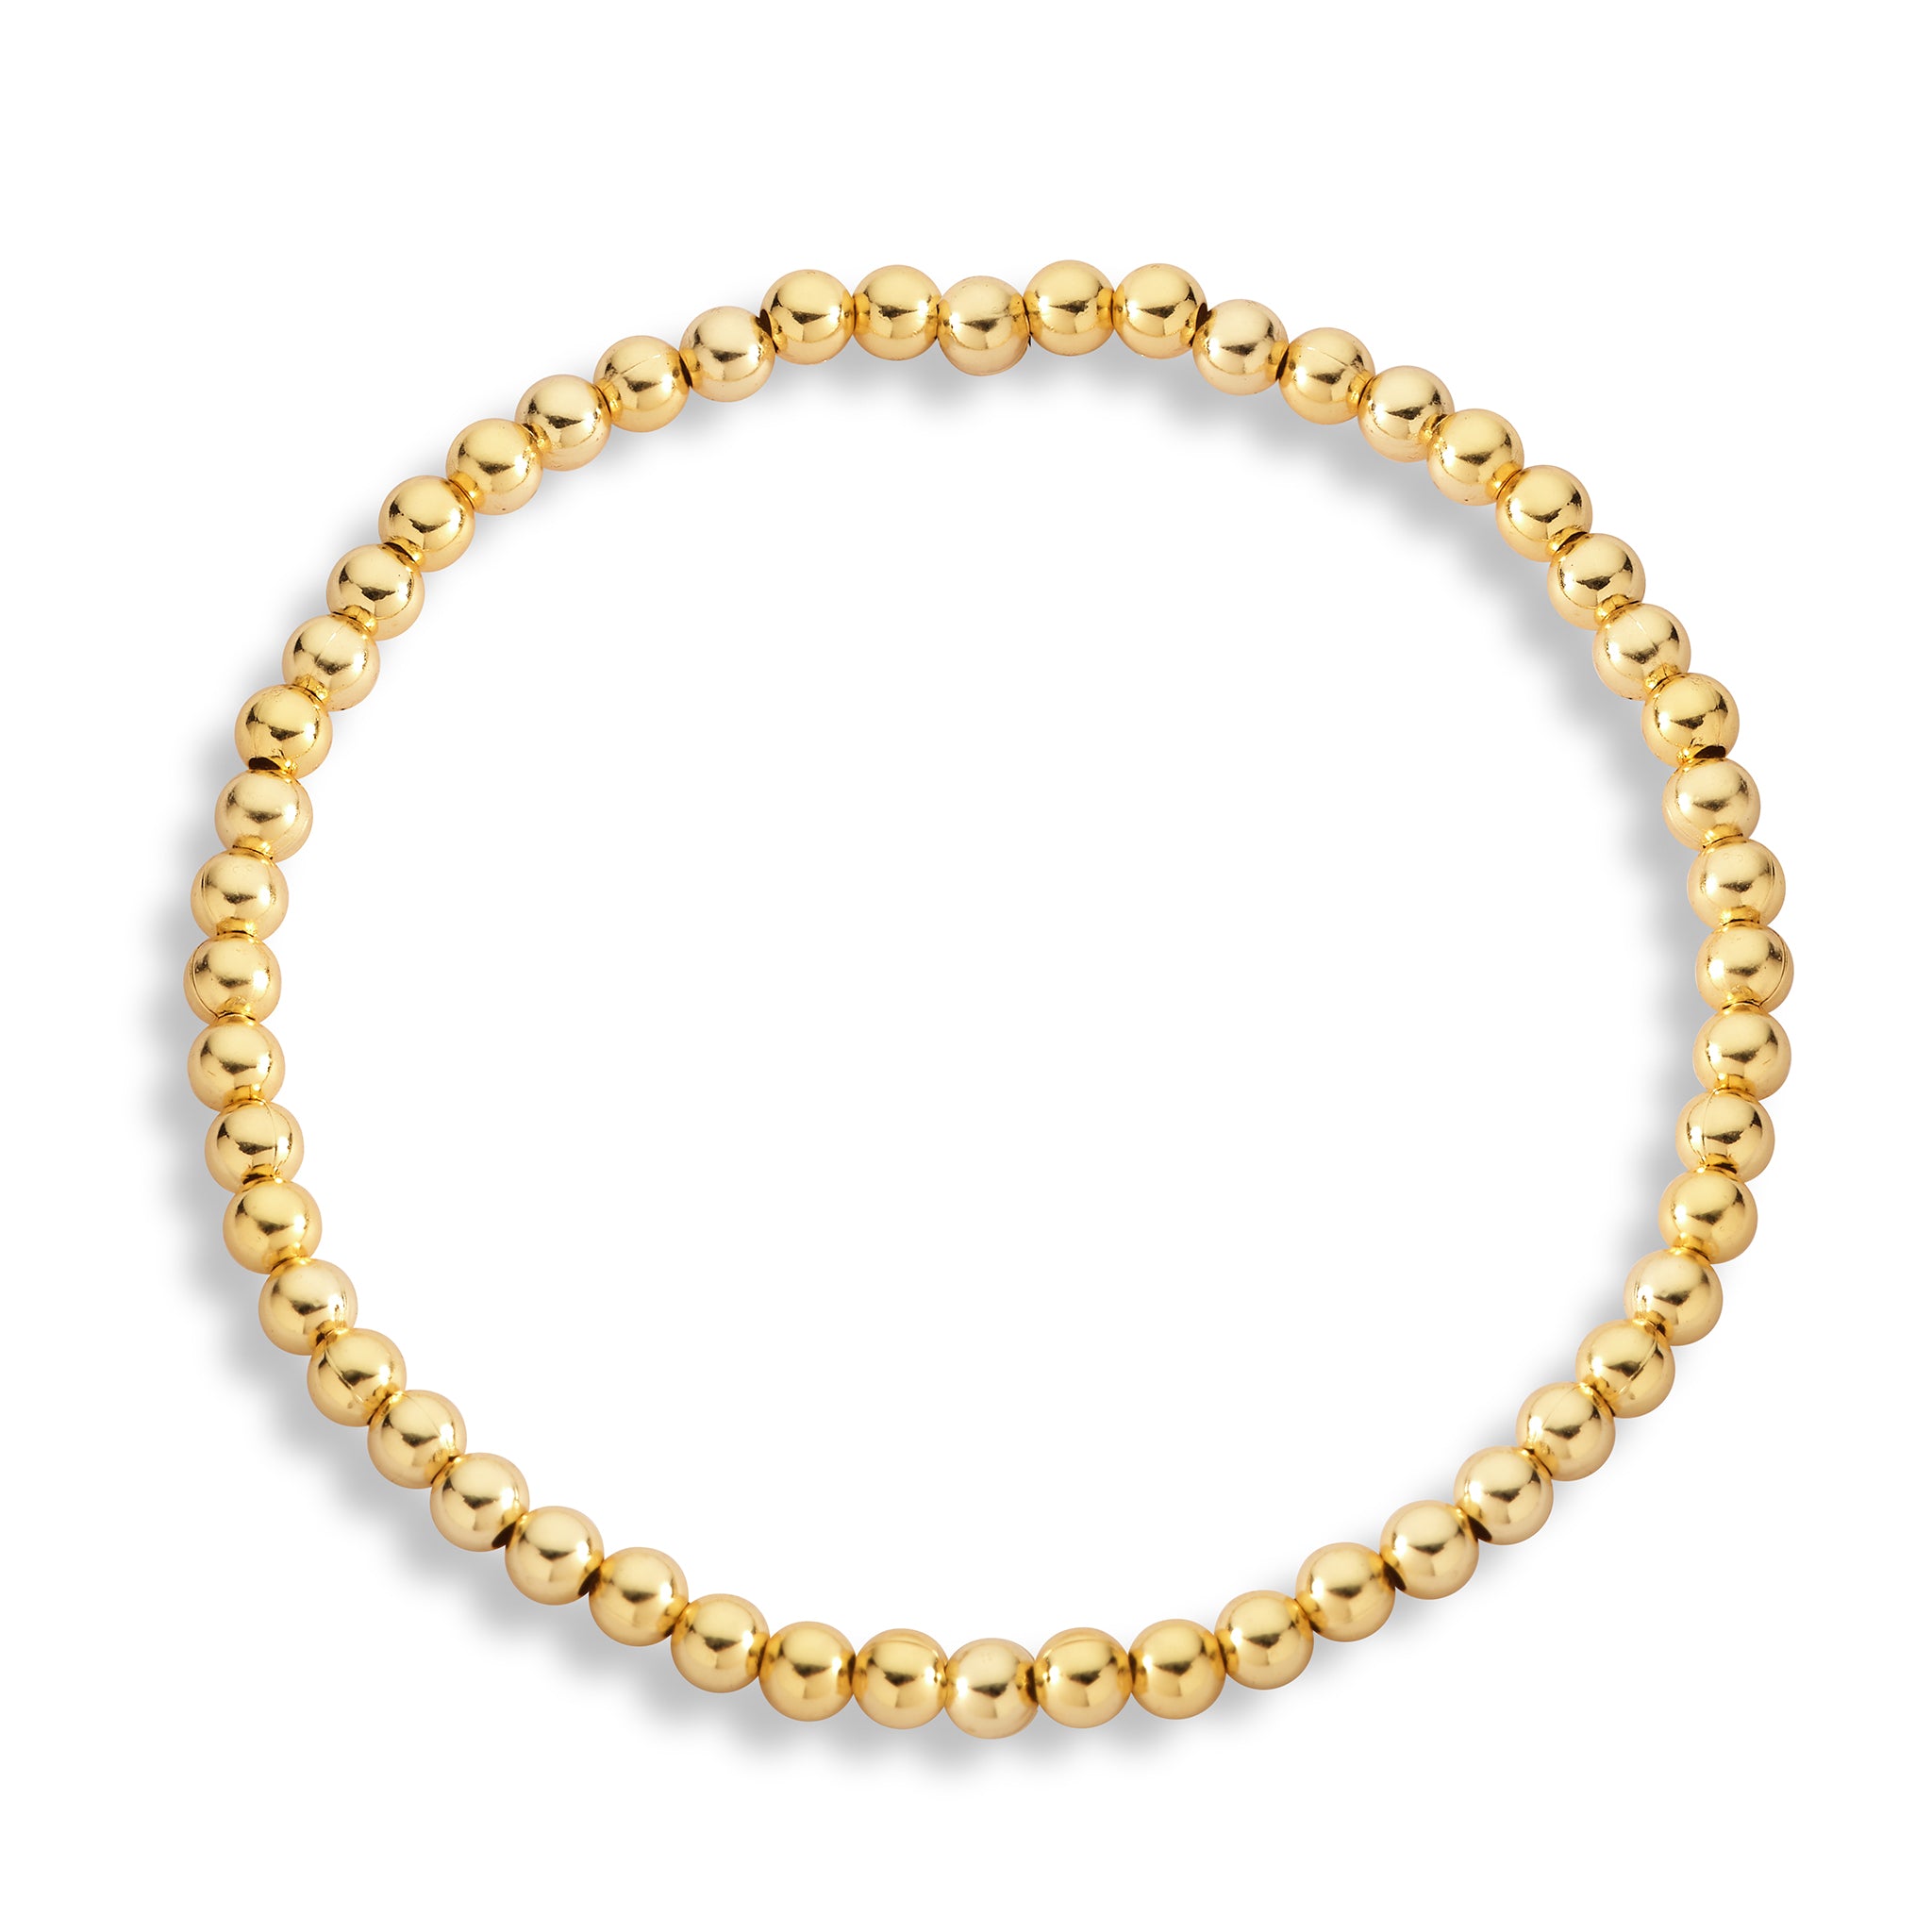 THE MAKERY GOLD PLATED 4MM ROUND BALL BRACELET